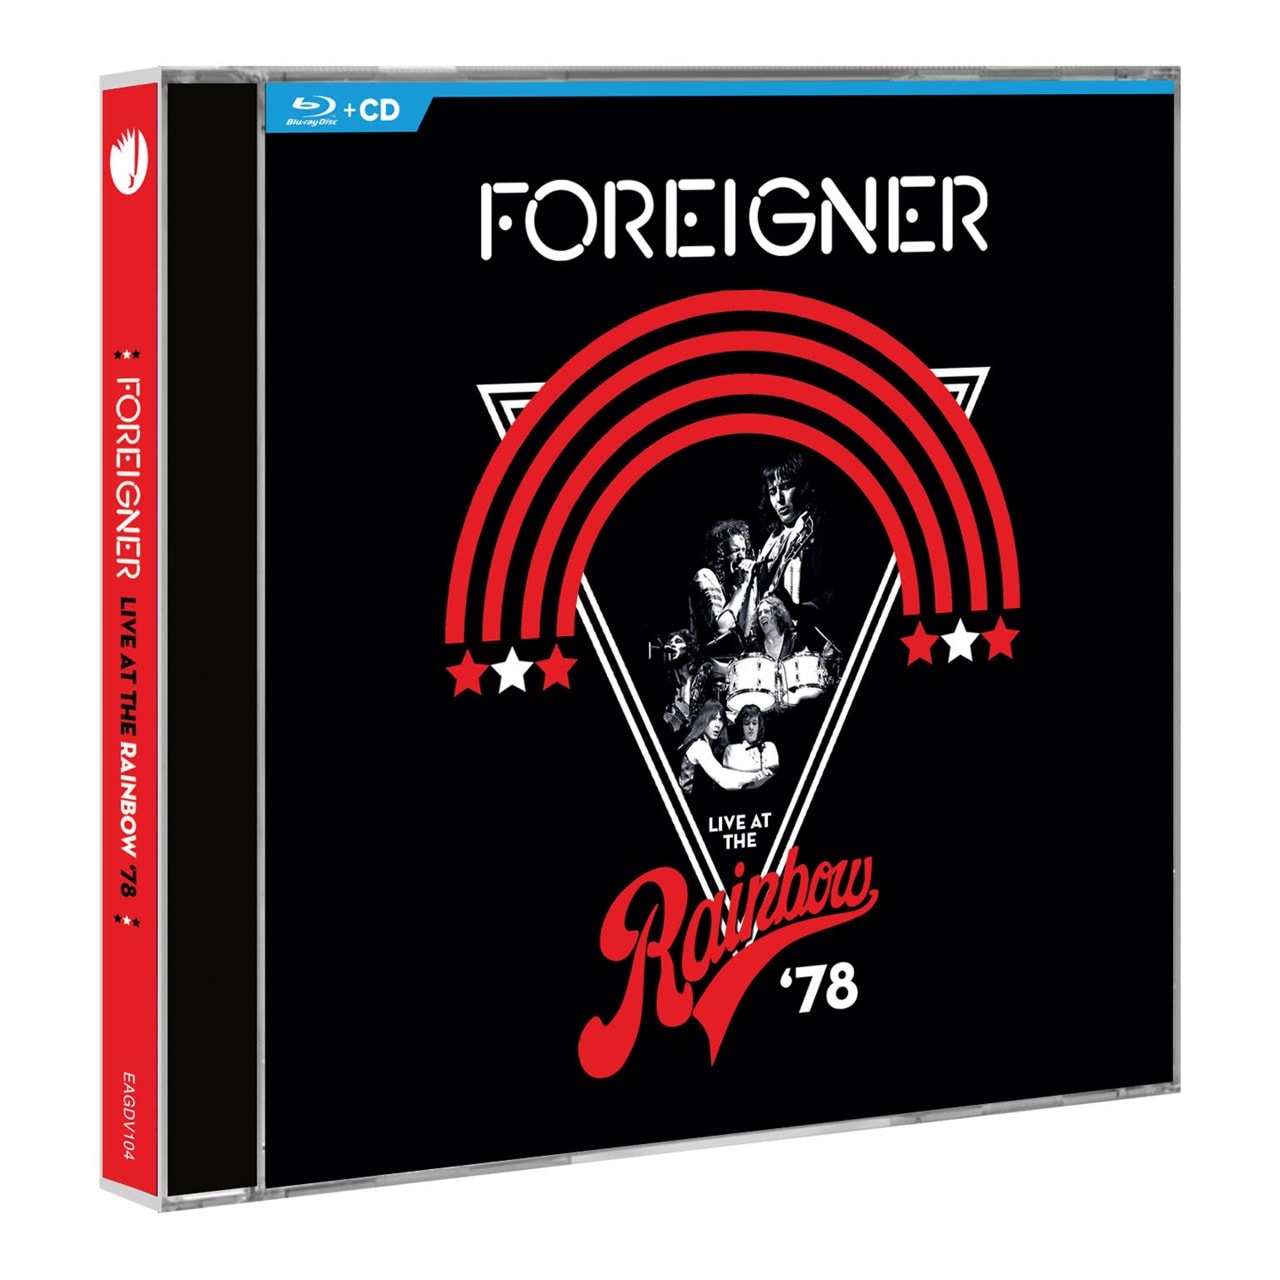 Cd 78. Foreigner "Live in Chicago". Foreigner Live at the Rainbow '78 Blu-ray. Foreigner CD. Rainbow 78.